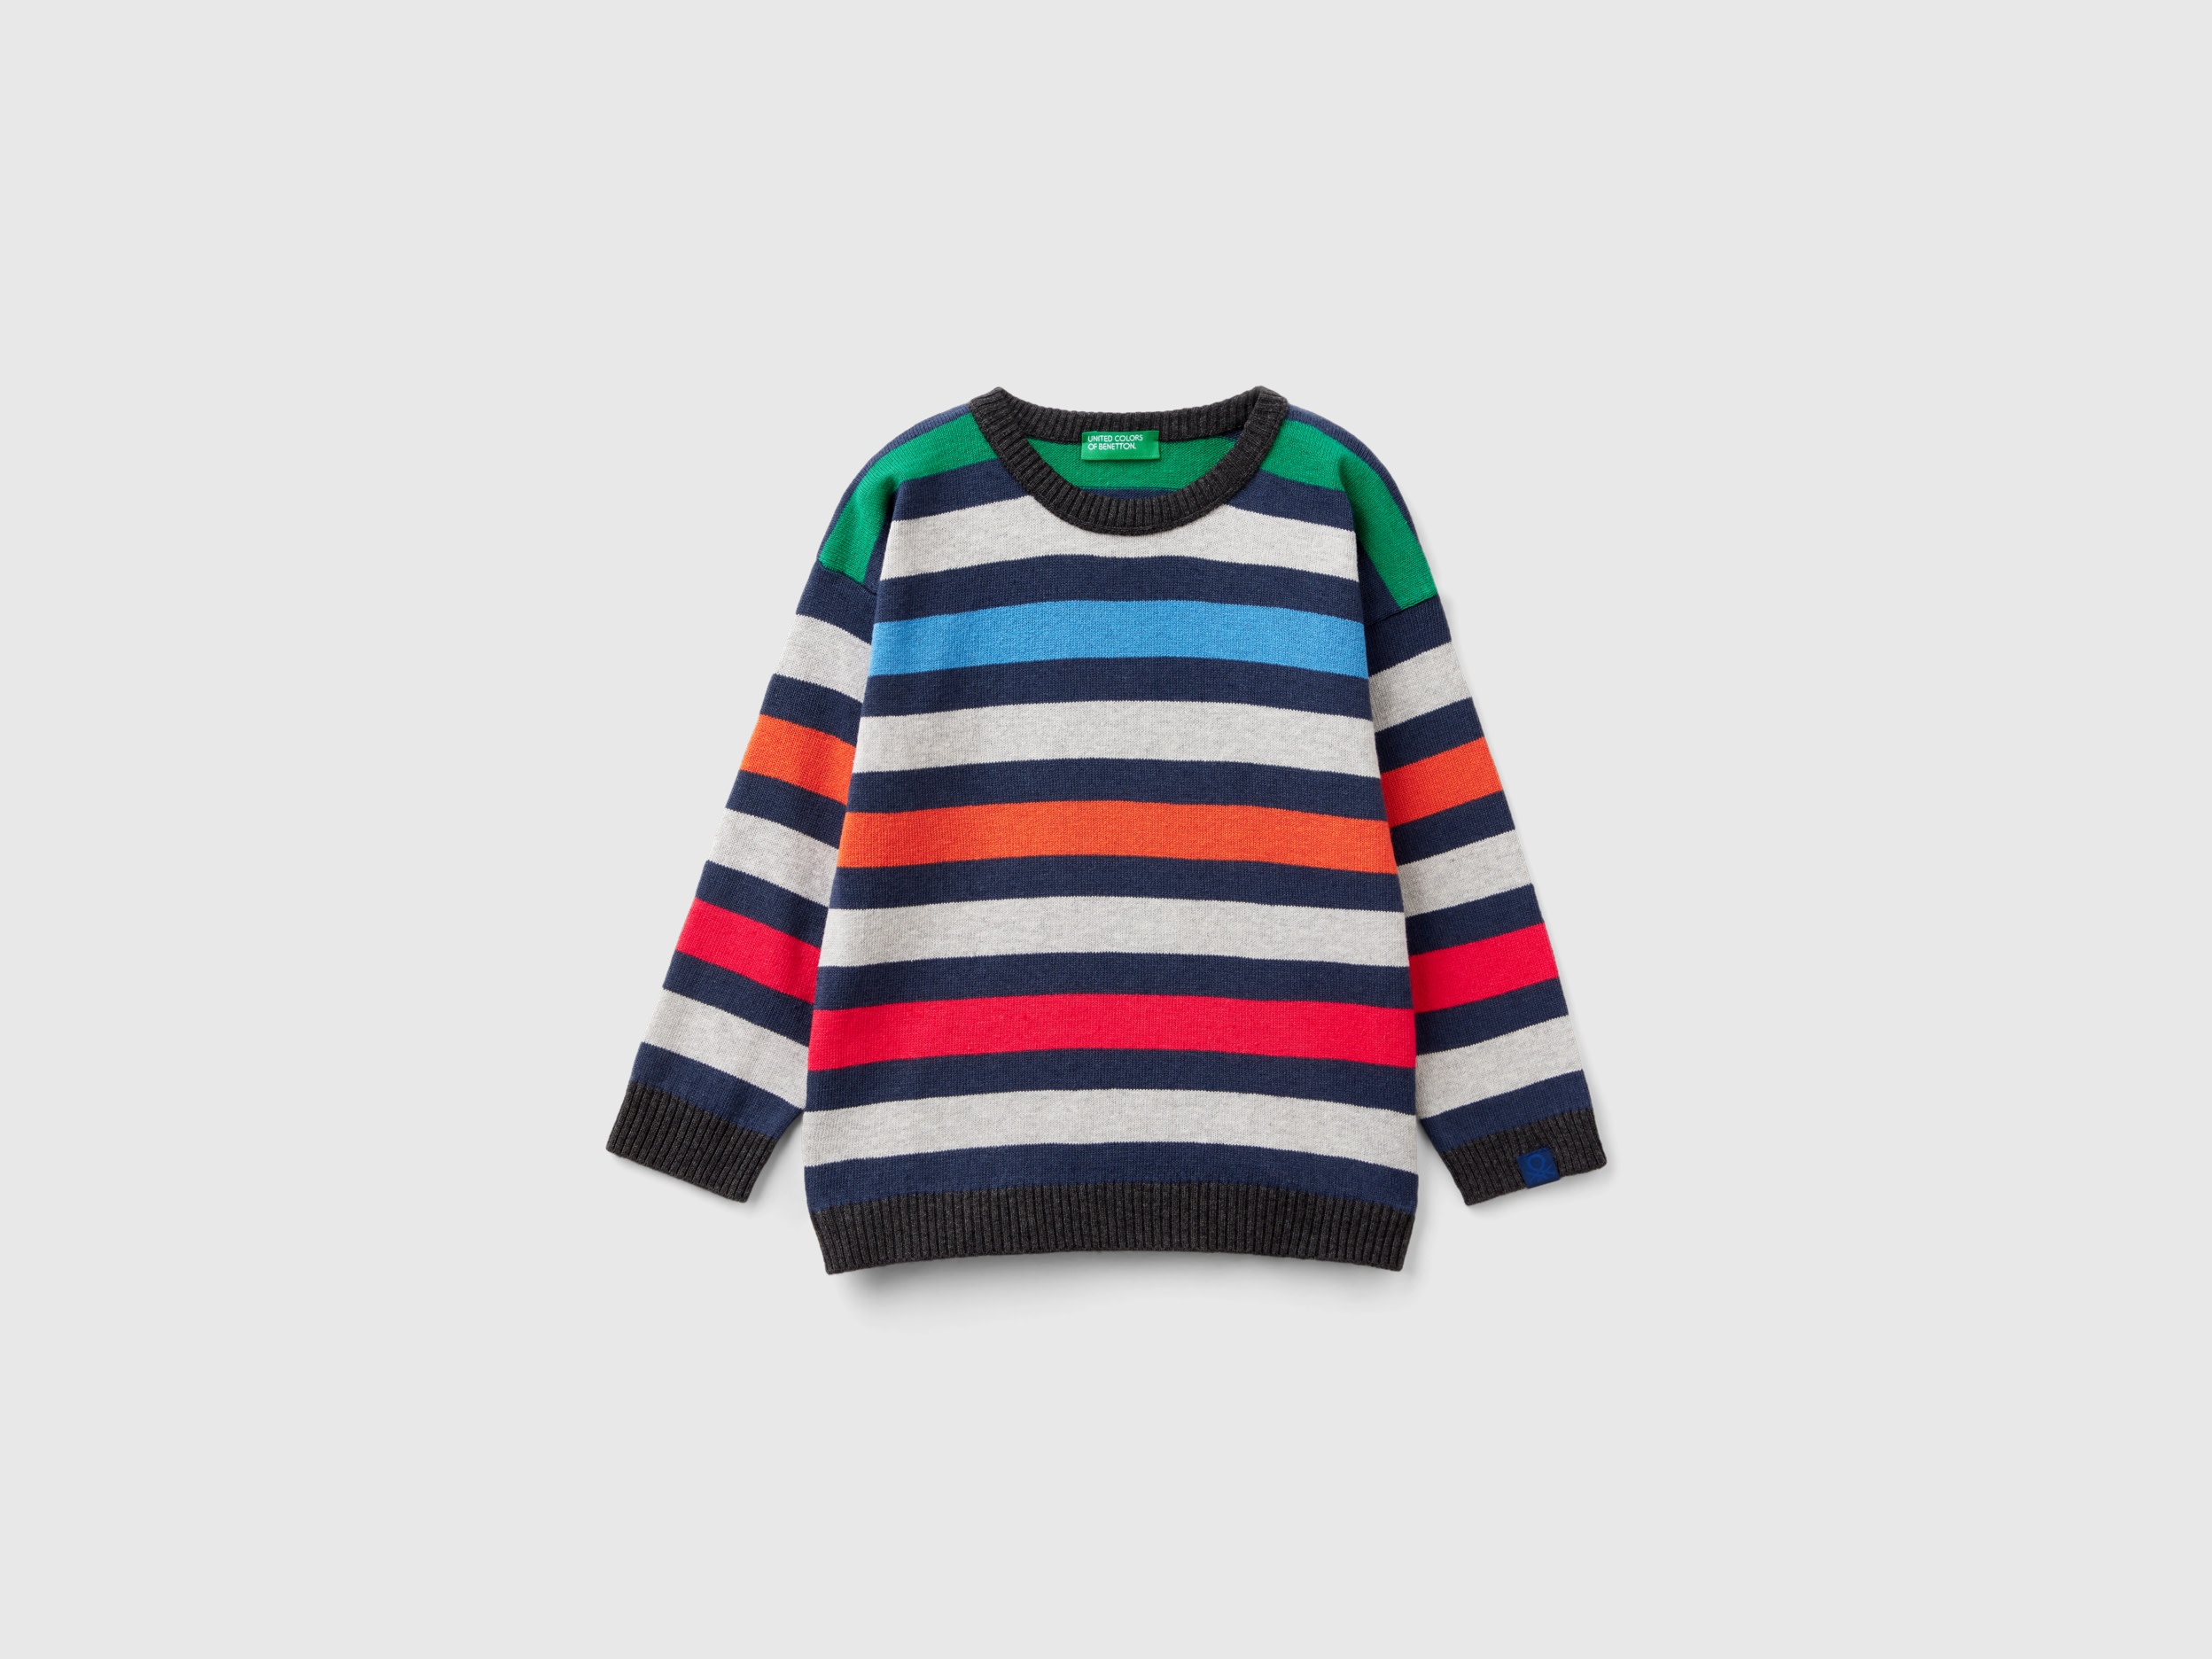 Image of Benetton, Striped Sweater, size 90, Multi-color, Kids